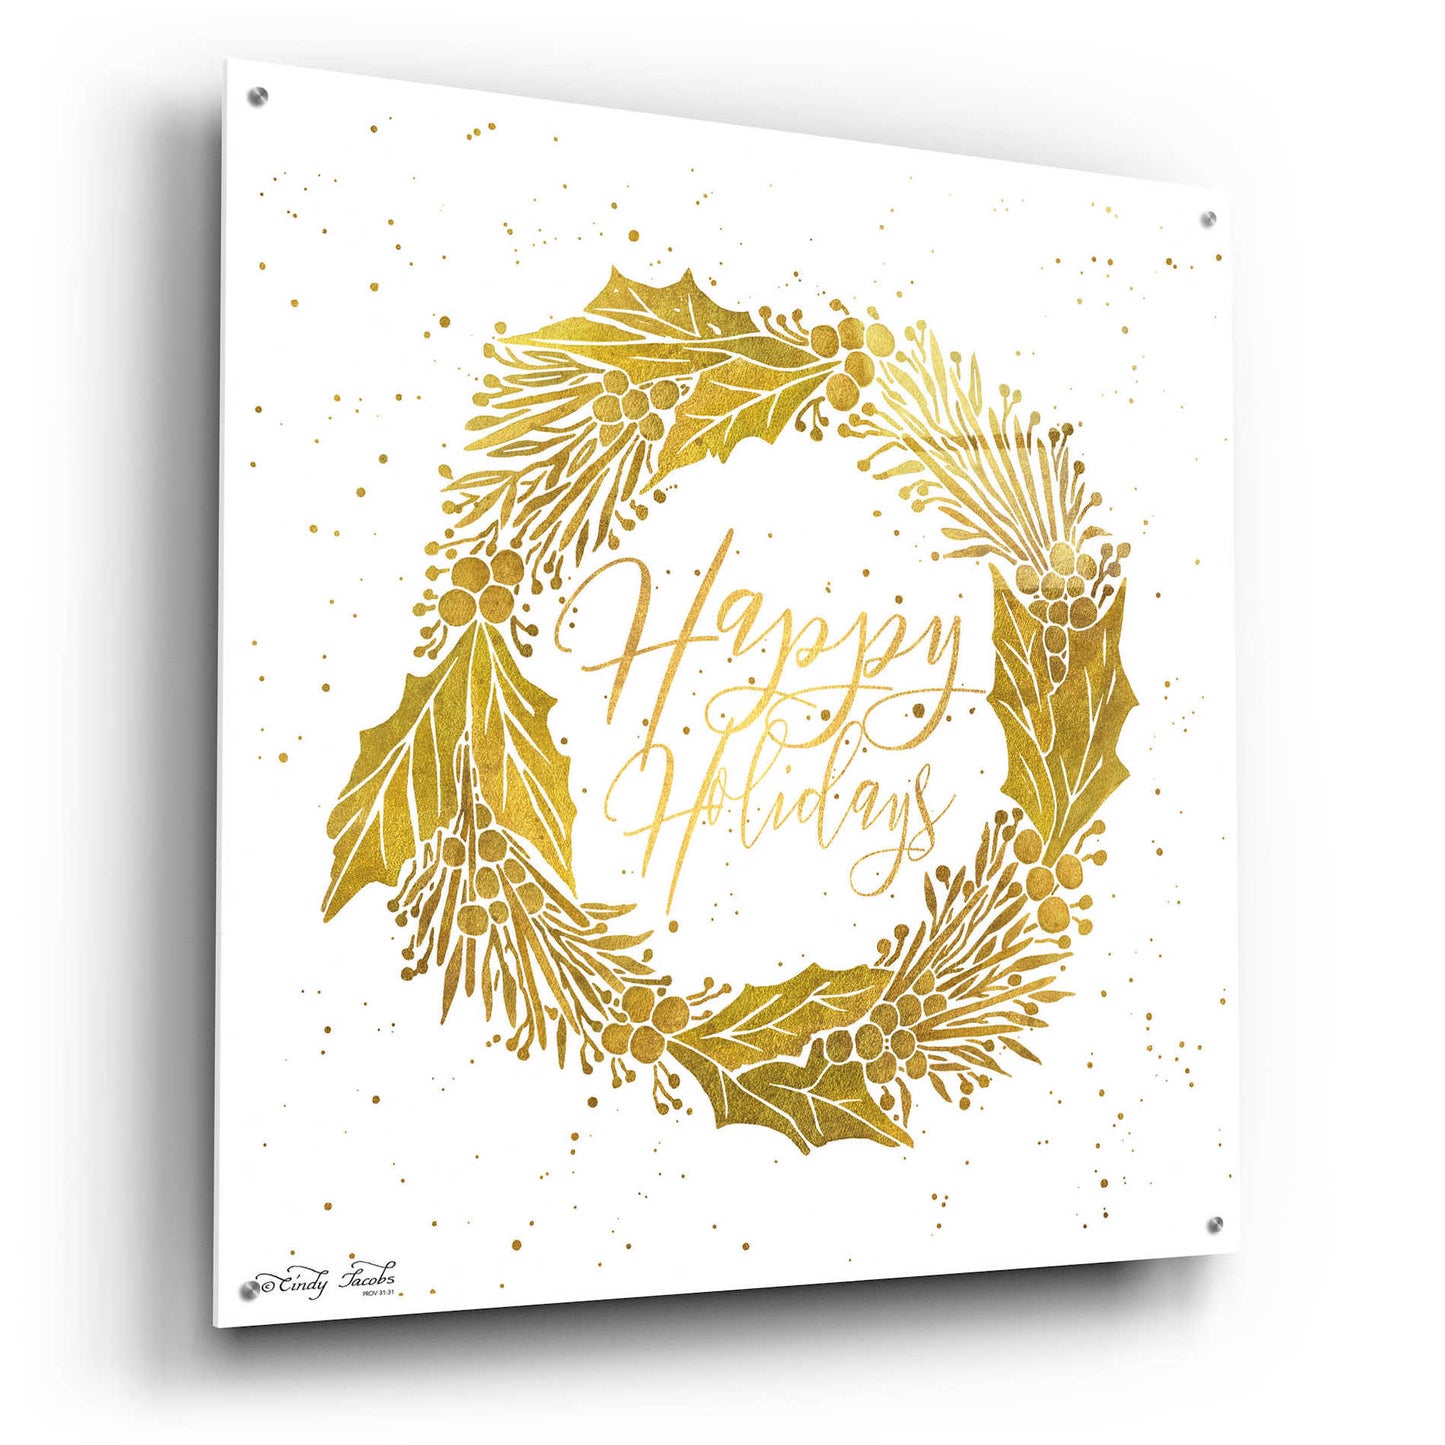 Epic Art 'Happy Holidays Golden Wreath' by Cindy Jacobs, Acrylic Glass Wall Art,36x36